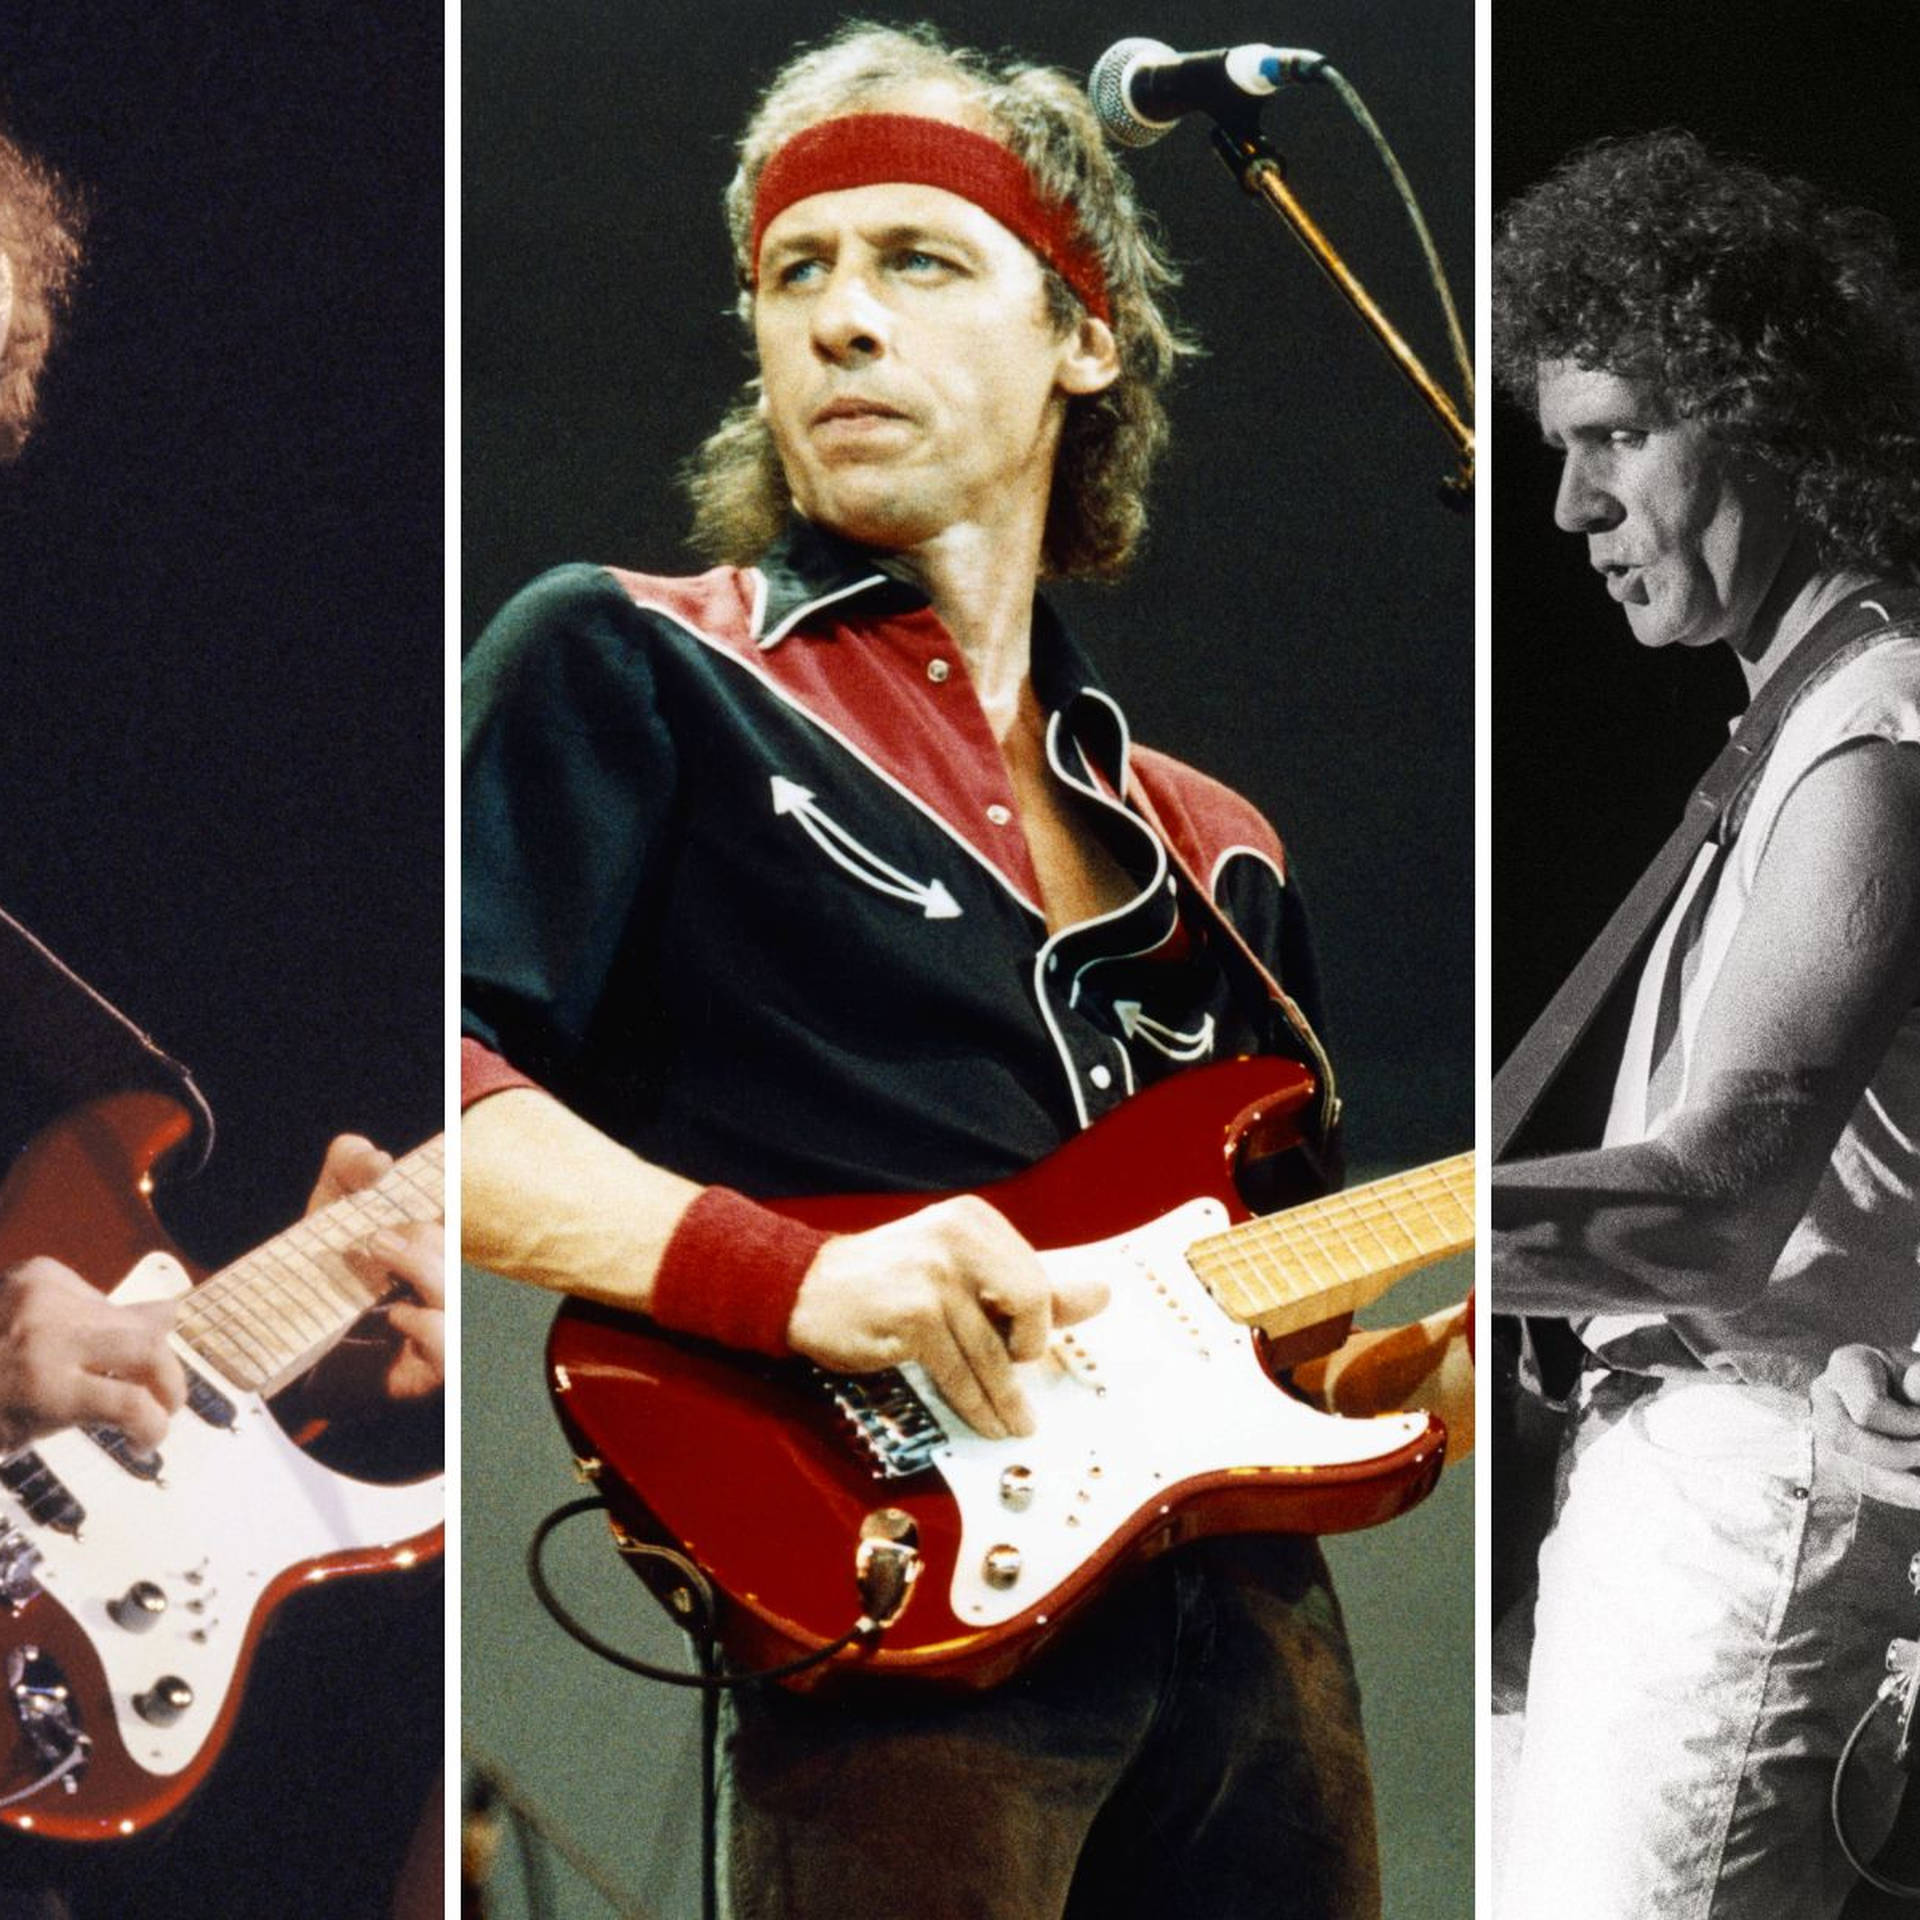 Dire Straits' 10 greatest songs, ranked - Gold